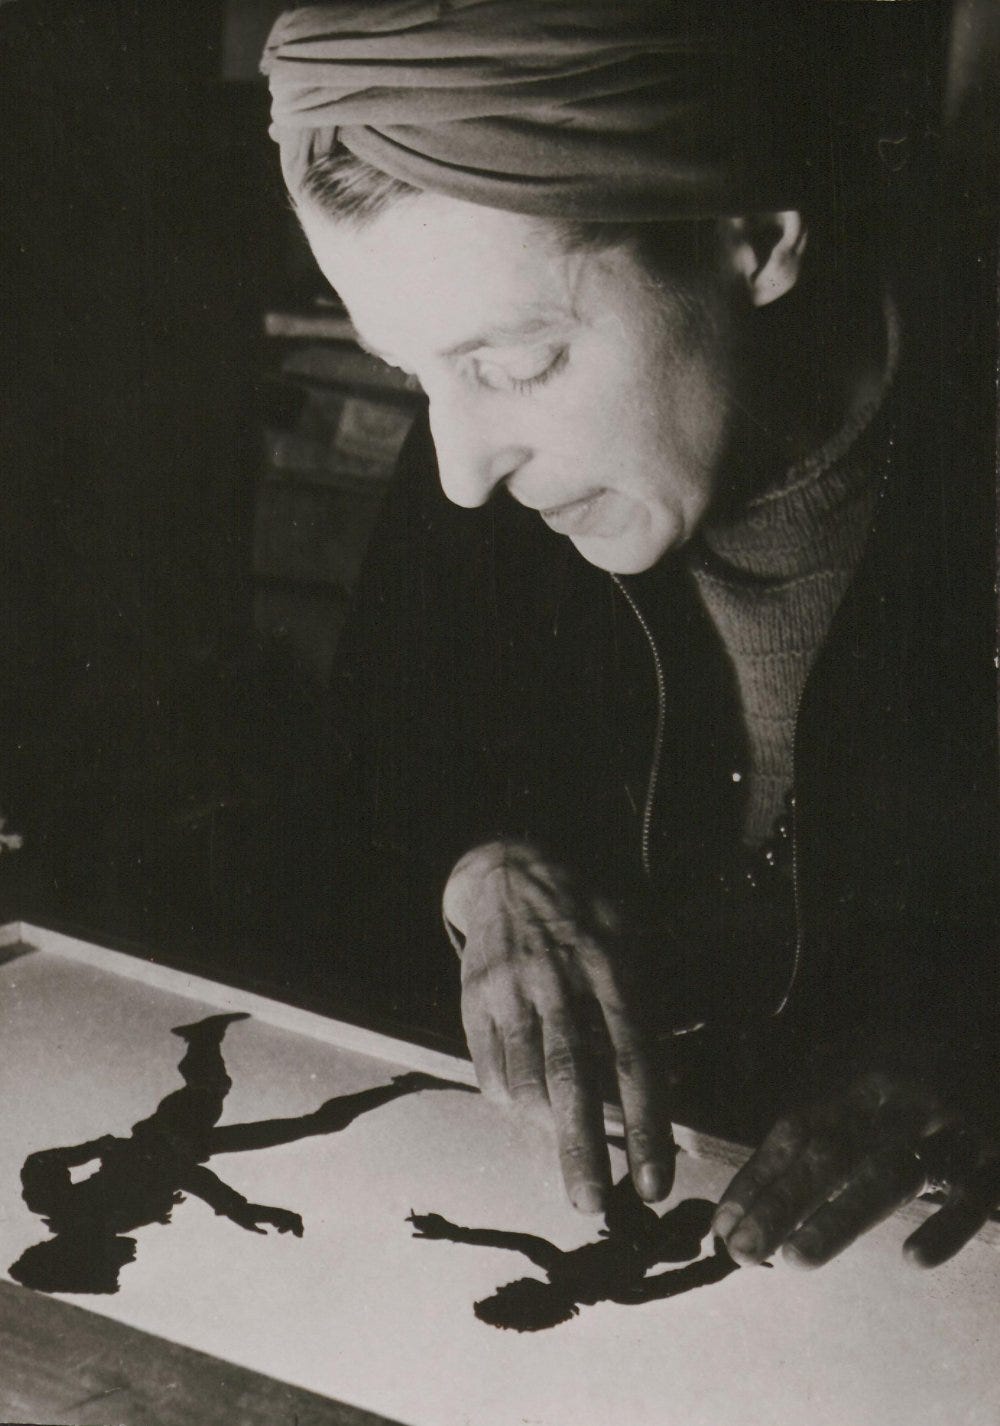 Scissors make films: Lotte Reiniger on creating her magical animations |  from the Sight & Sound archive | BFI